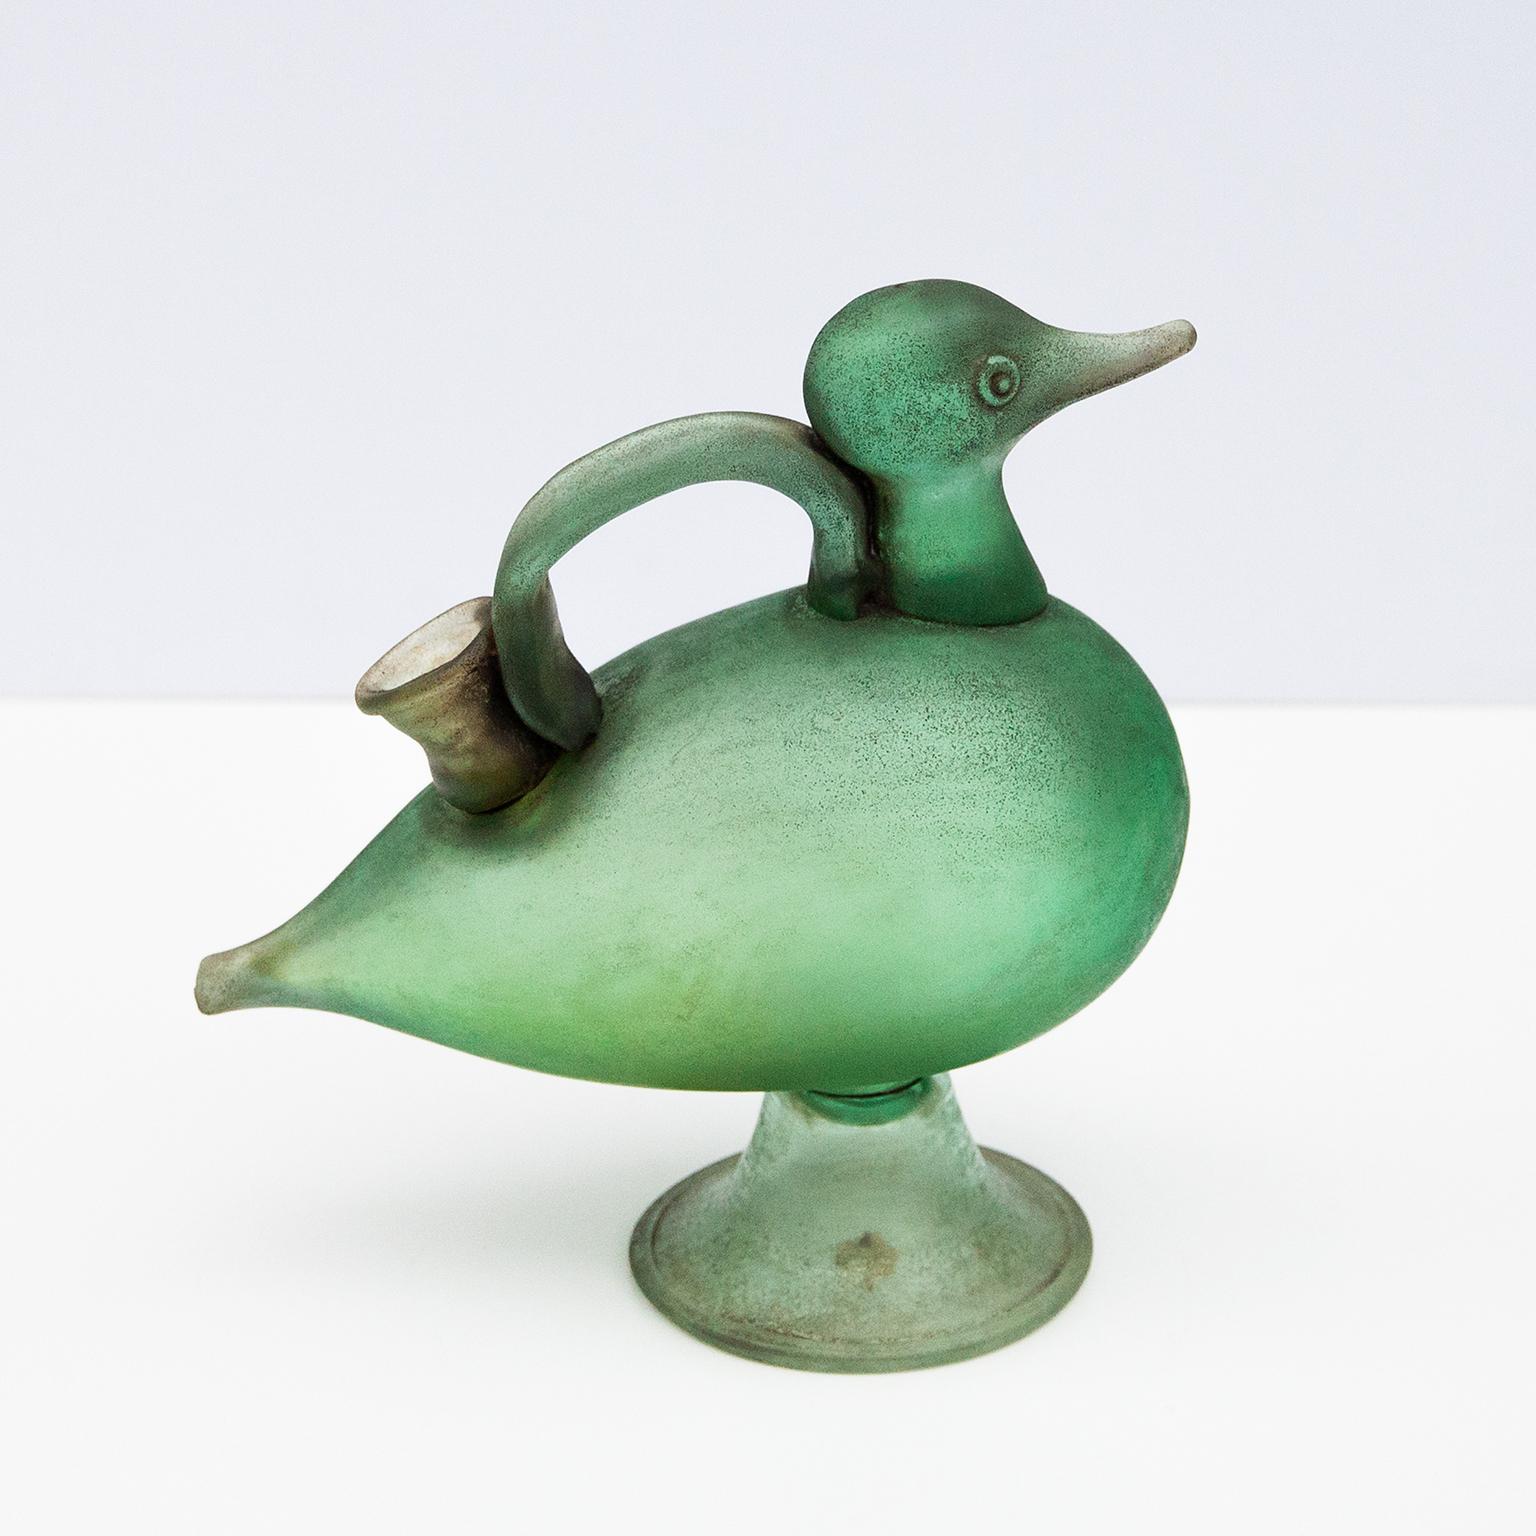 Duck sculpture candle holder designed by Flavio Poli in the 1950s.
Seguso paper sticker included.